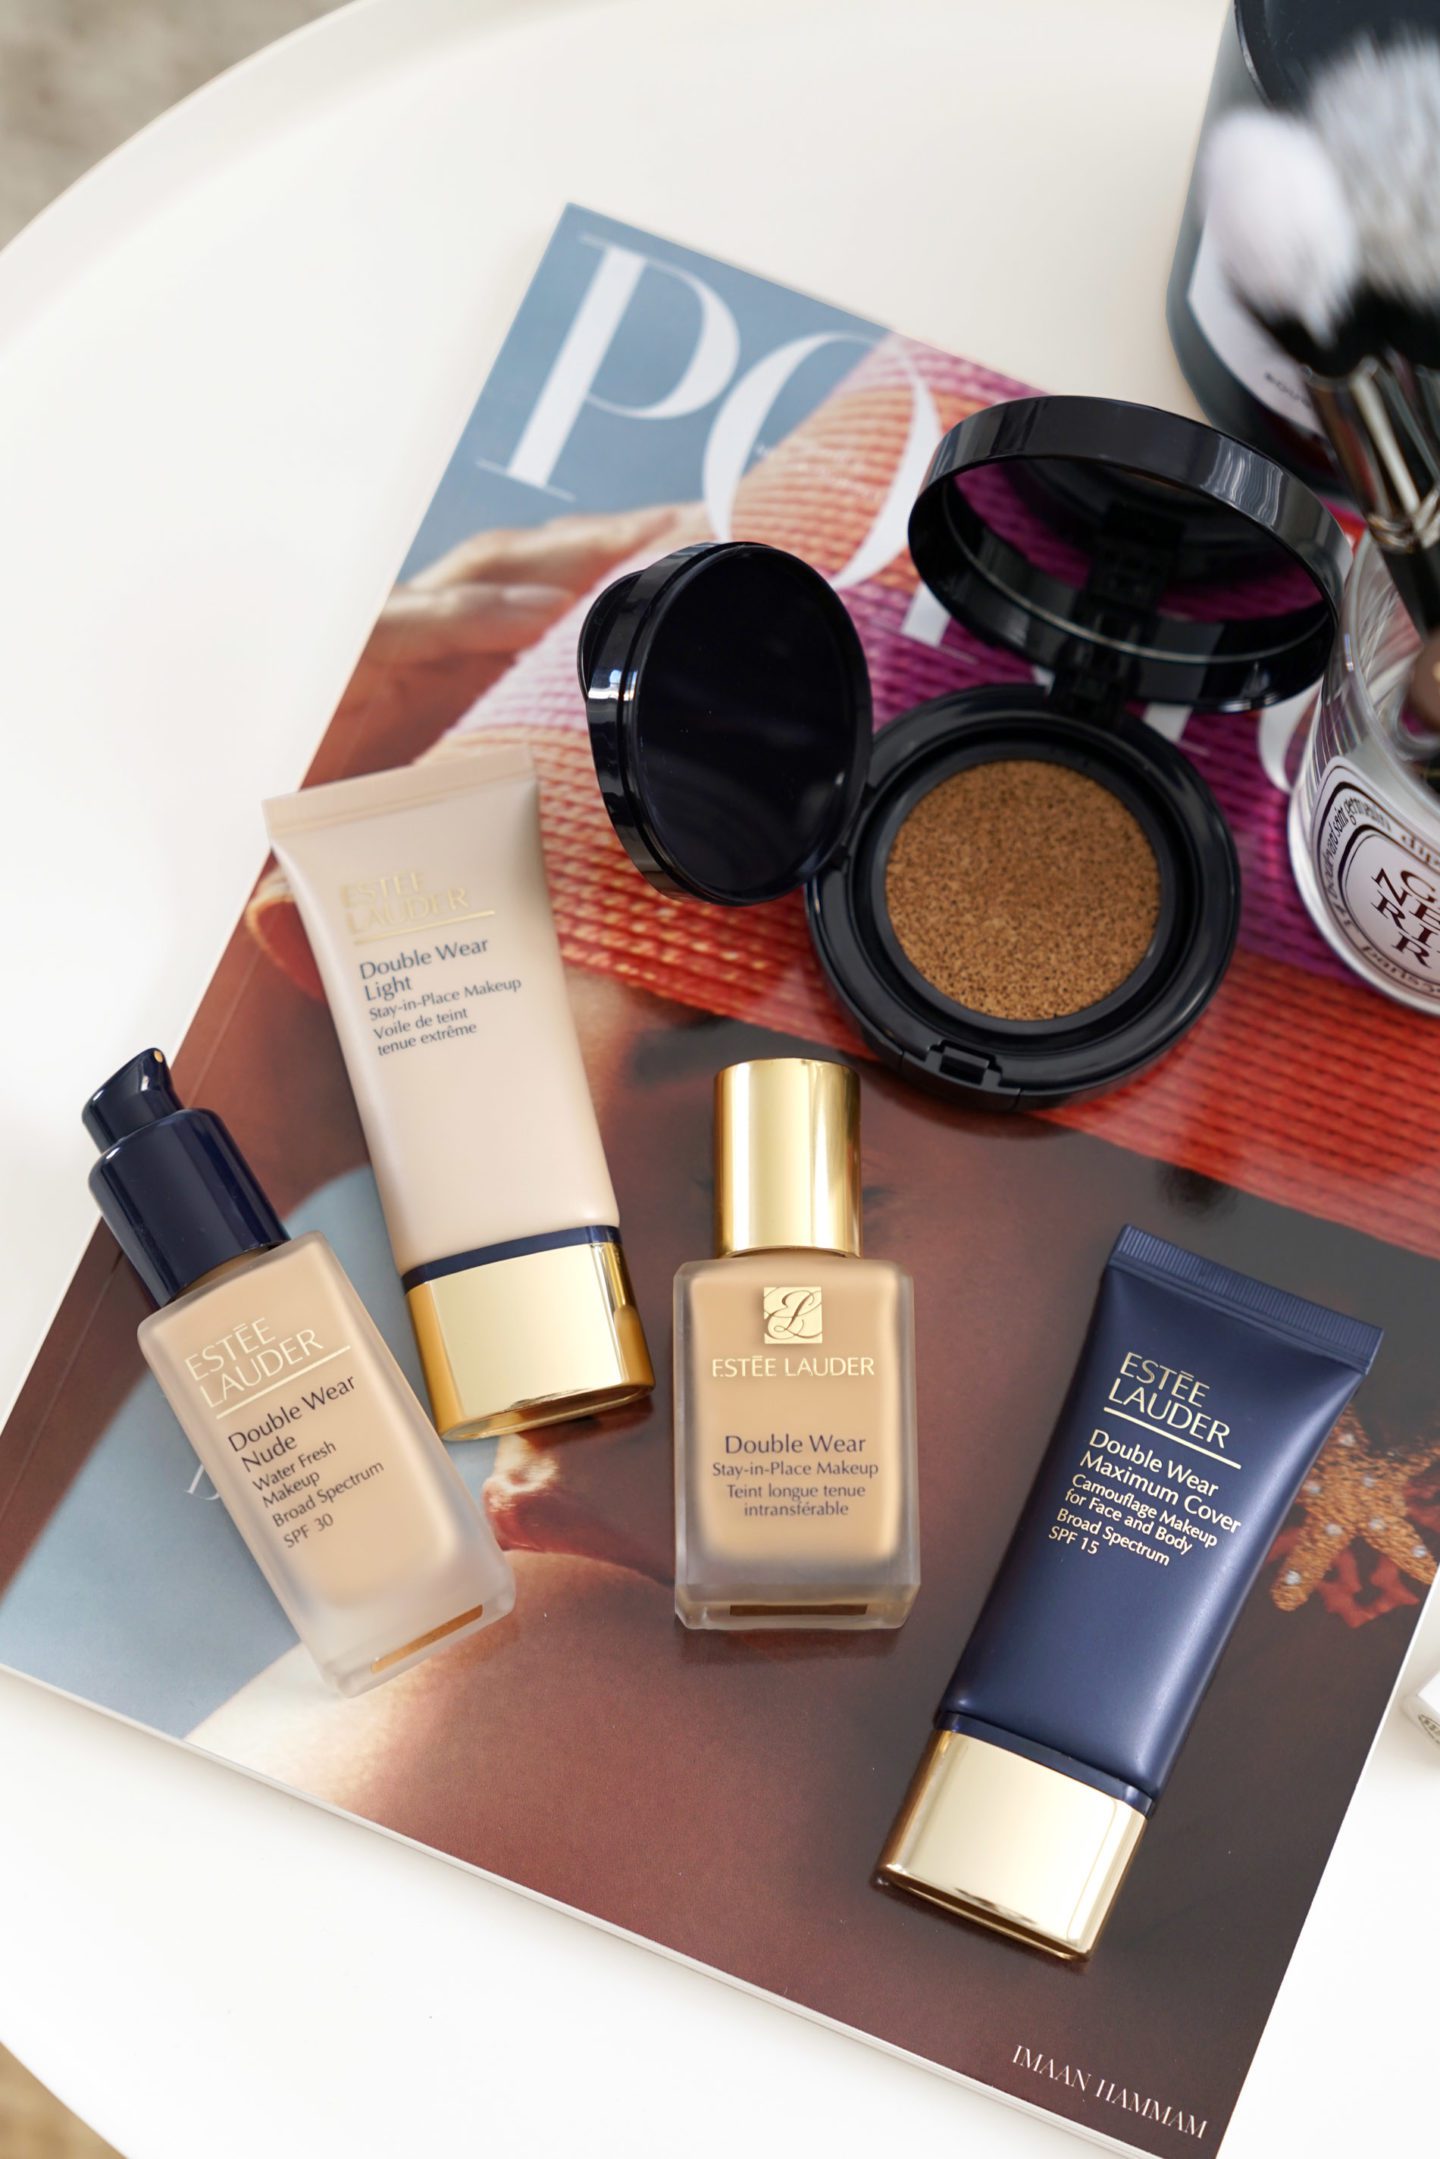 Estee Lauder Double Wear Foundation, Double Wear Nude + Light + Cushion BB + Maximum Coverage Review and Swatches 3W1 Tawny | The Beauty Look Book